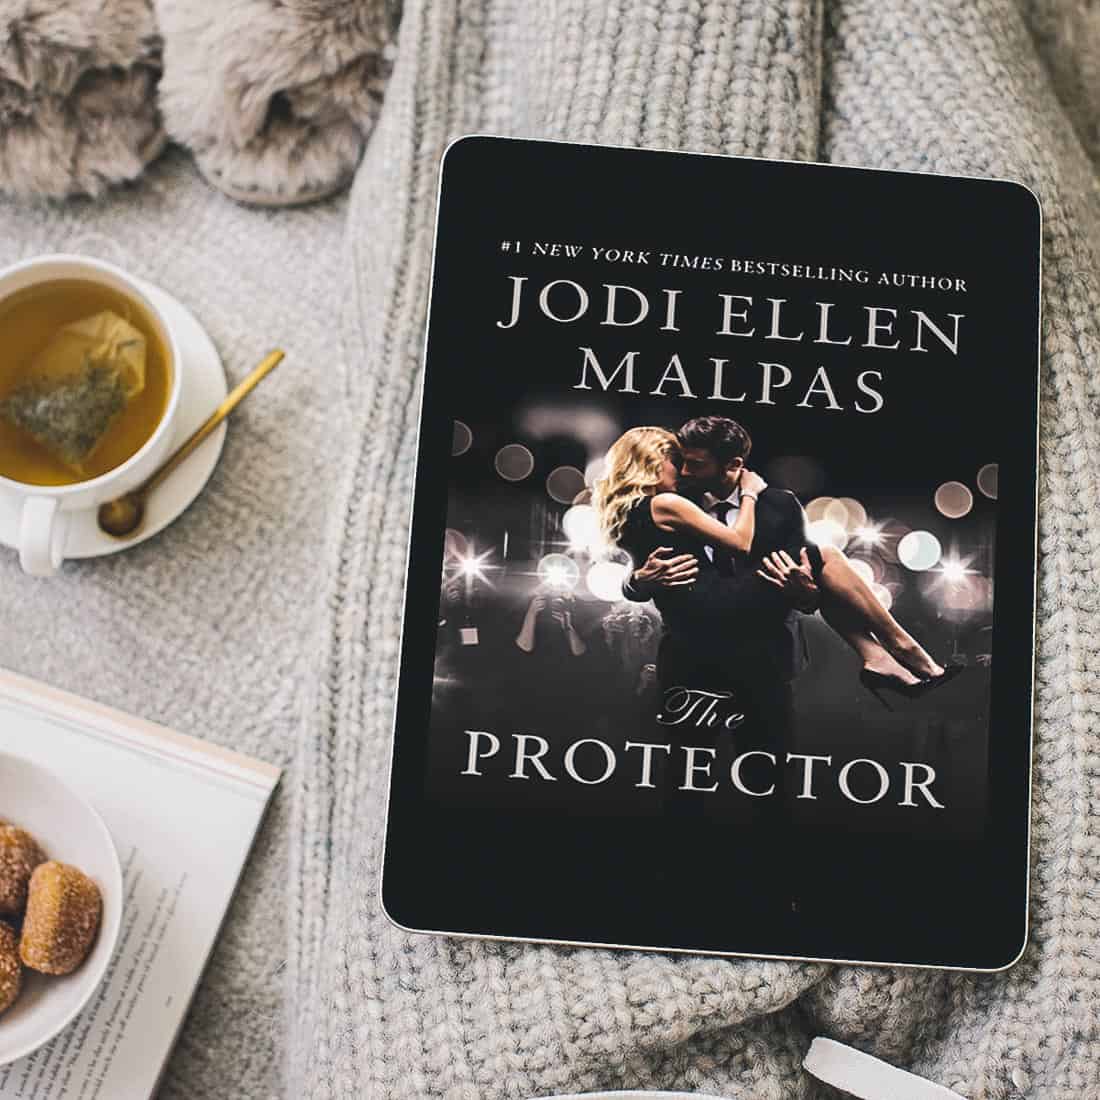 The Protector by Jodi Ellen Malpas is an angsty enemies-to-lovers contemporary romance between a hot alpha hero and his celebrity client